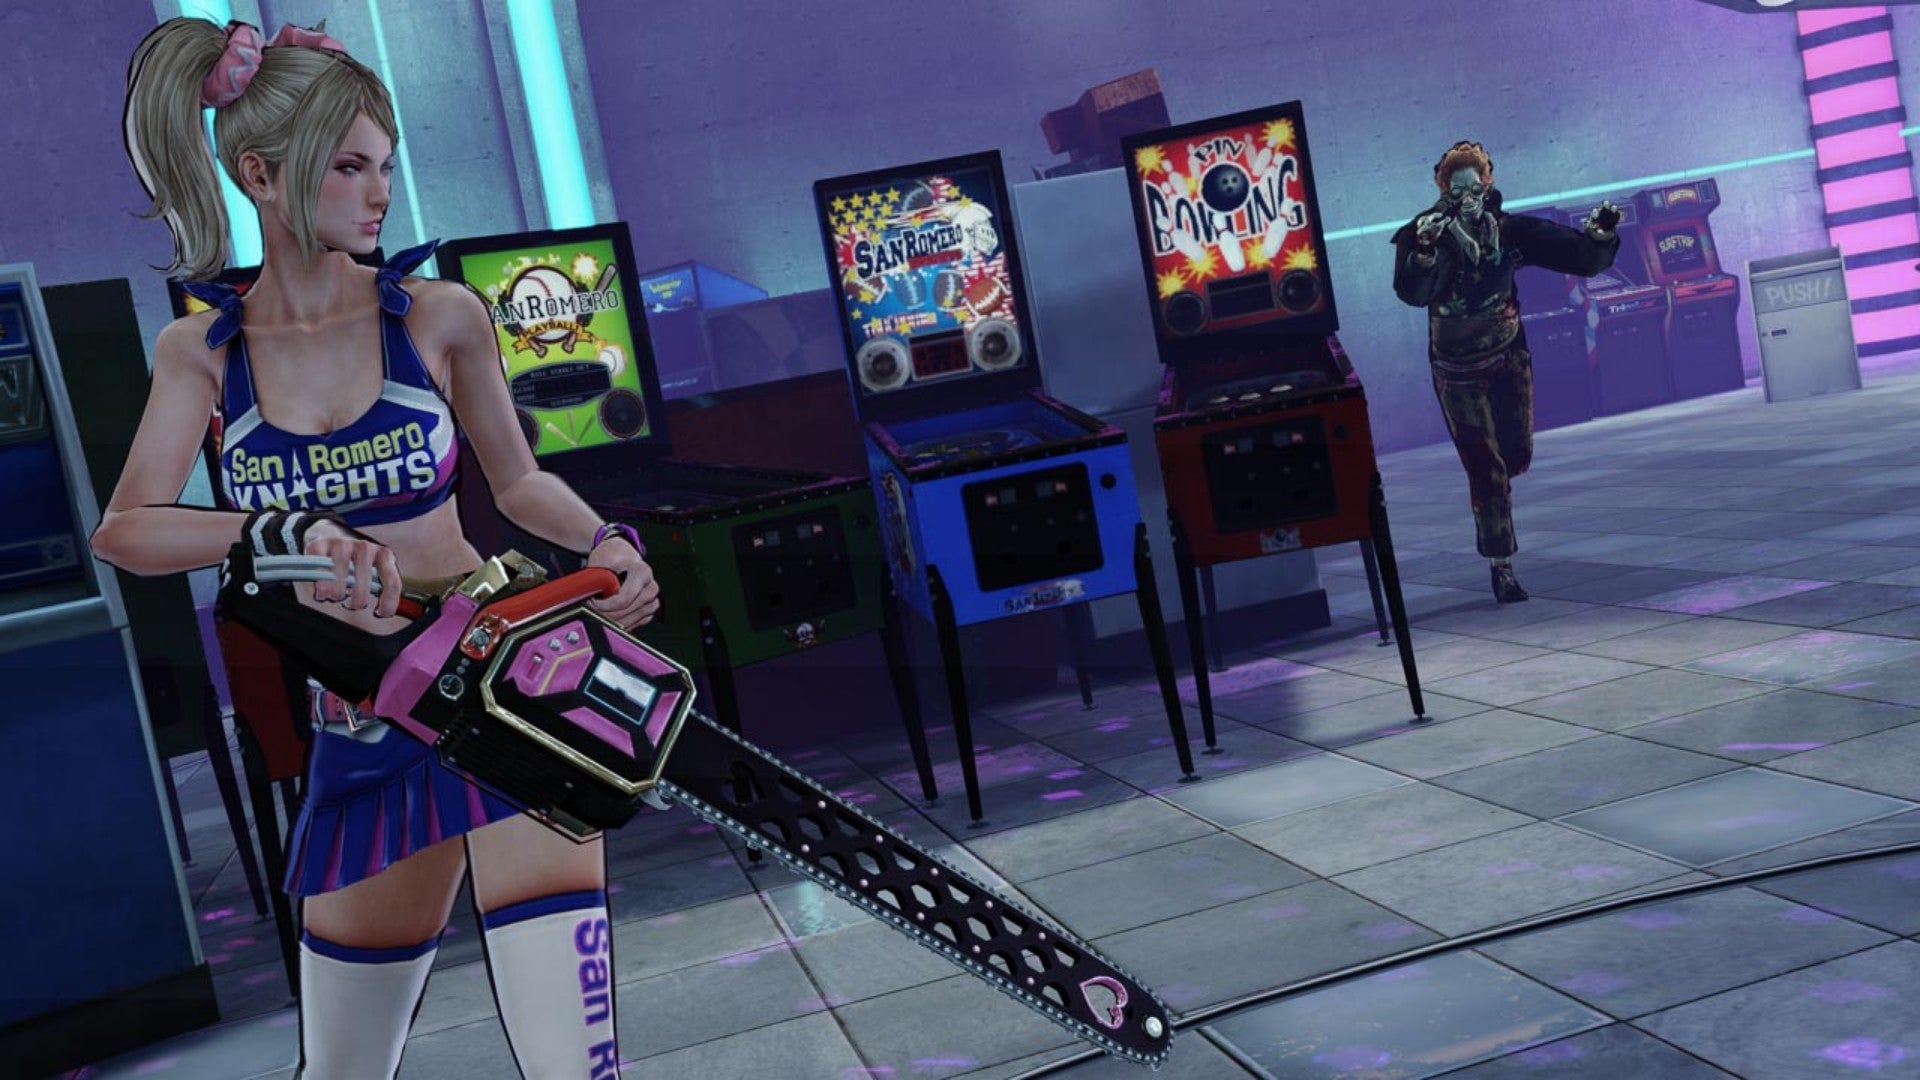 Juliet of Lollipop Chainsaw stands in front of four arcade machines while a zombie approaches.